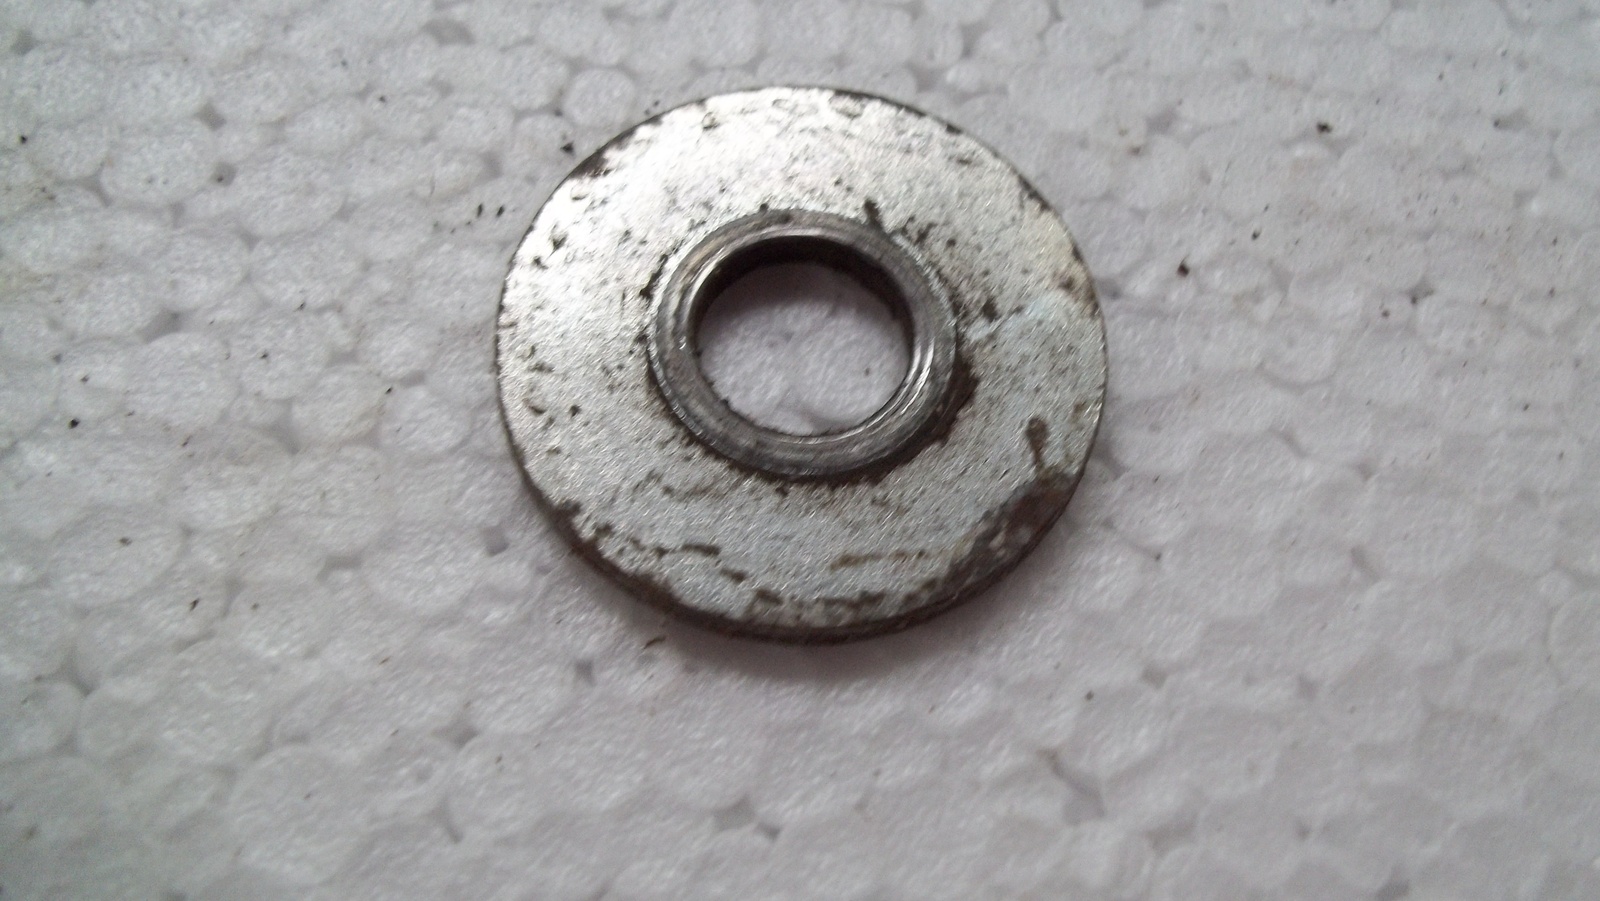 Primary image for Washer 532067725 from Craftsman Lawnmower Model 917.377810